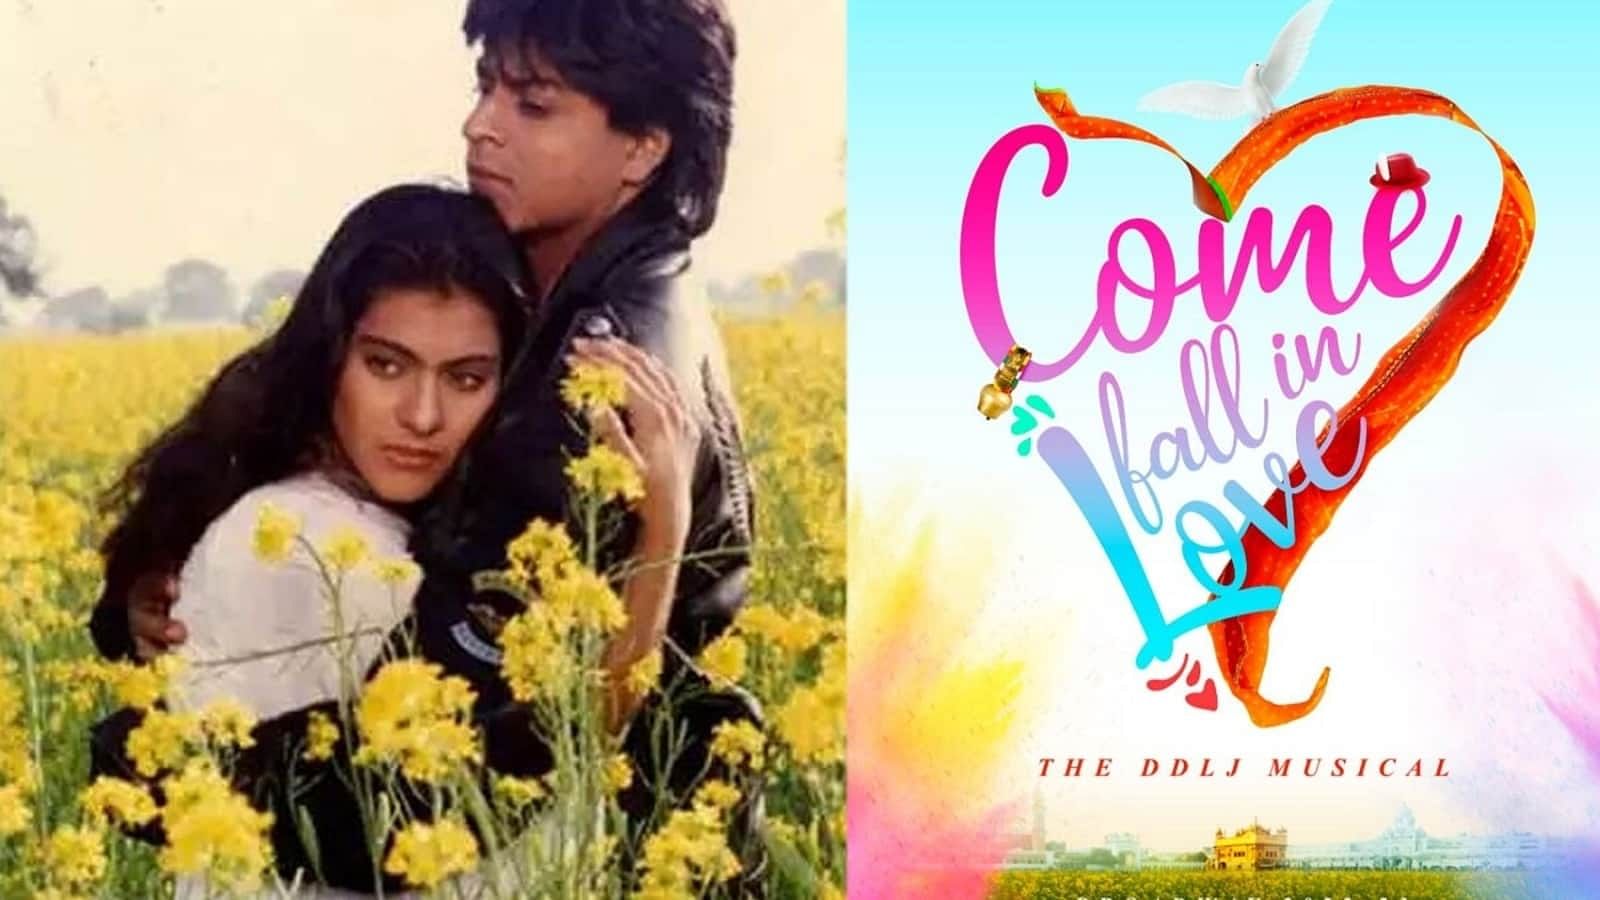 <div class="paragraphs"><p>Aditya's Chopra's Come Fall in Love - The DDLJ Musical premiered at Broadway.</p></div>